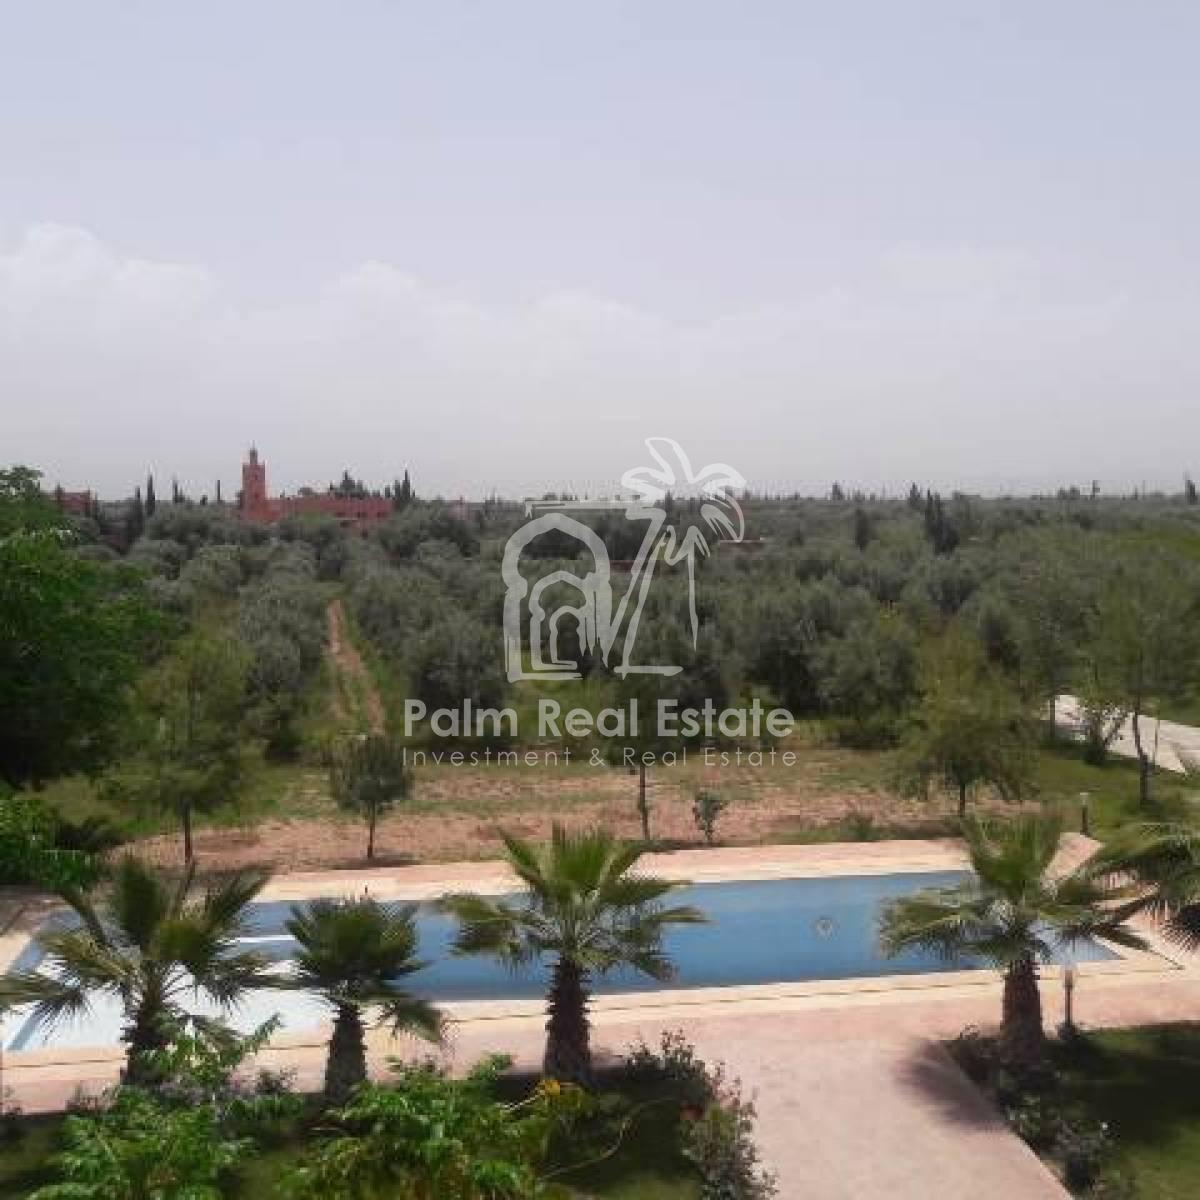 Villa - House for sale in Marrakech 4 000 000 DH